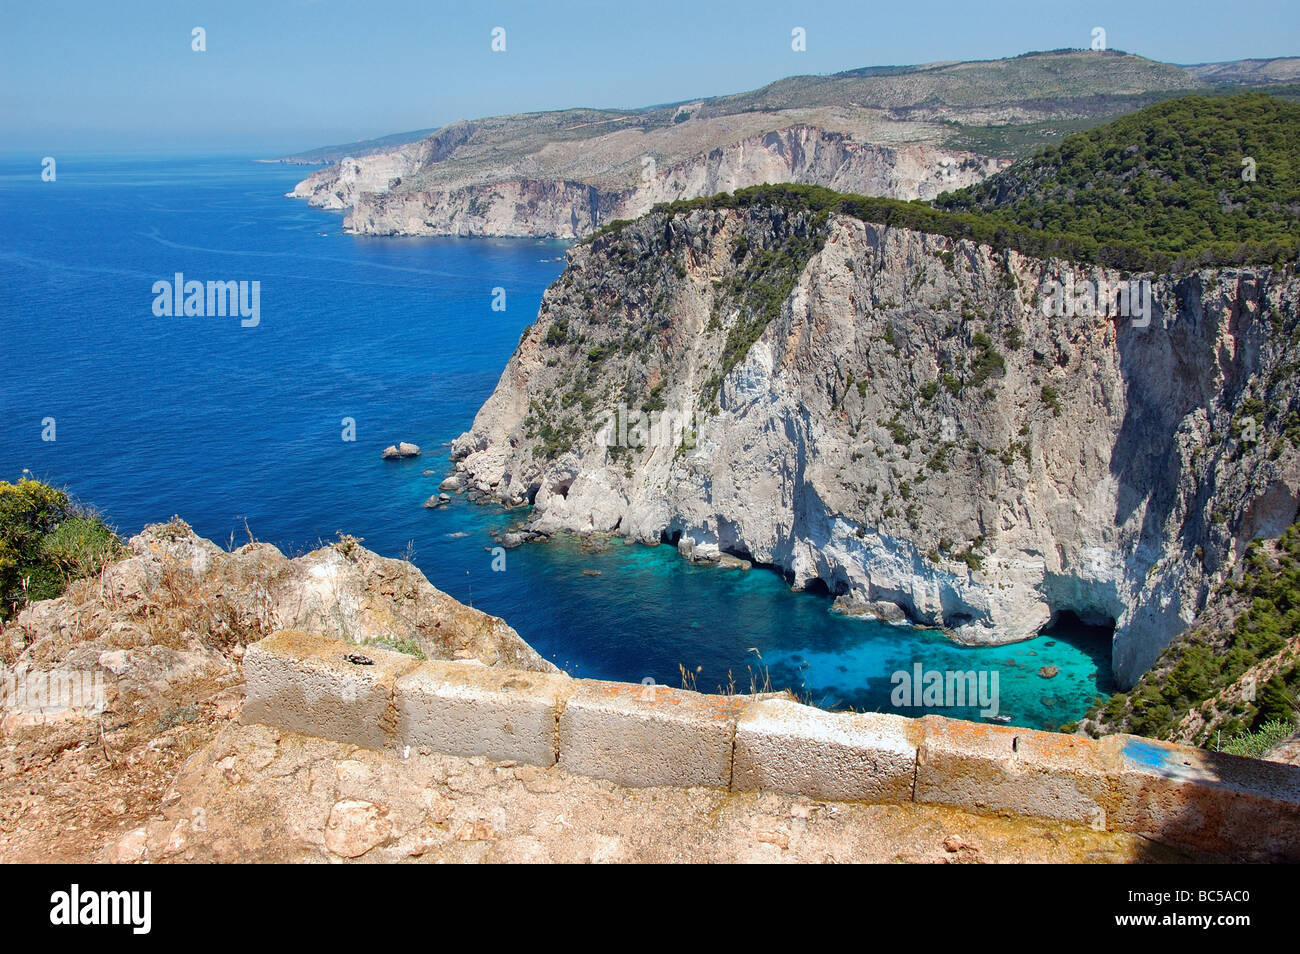 The ridges beyond Keri village in the protected sea park of Laganas in the island of Zakynthos, Greece. Stock Photo